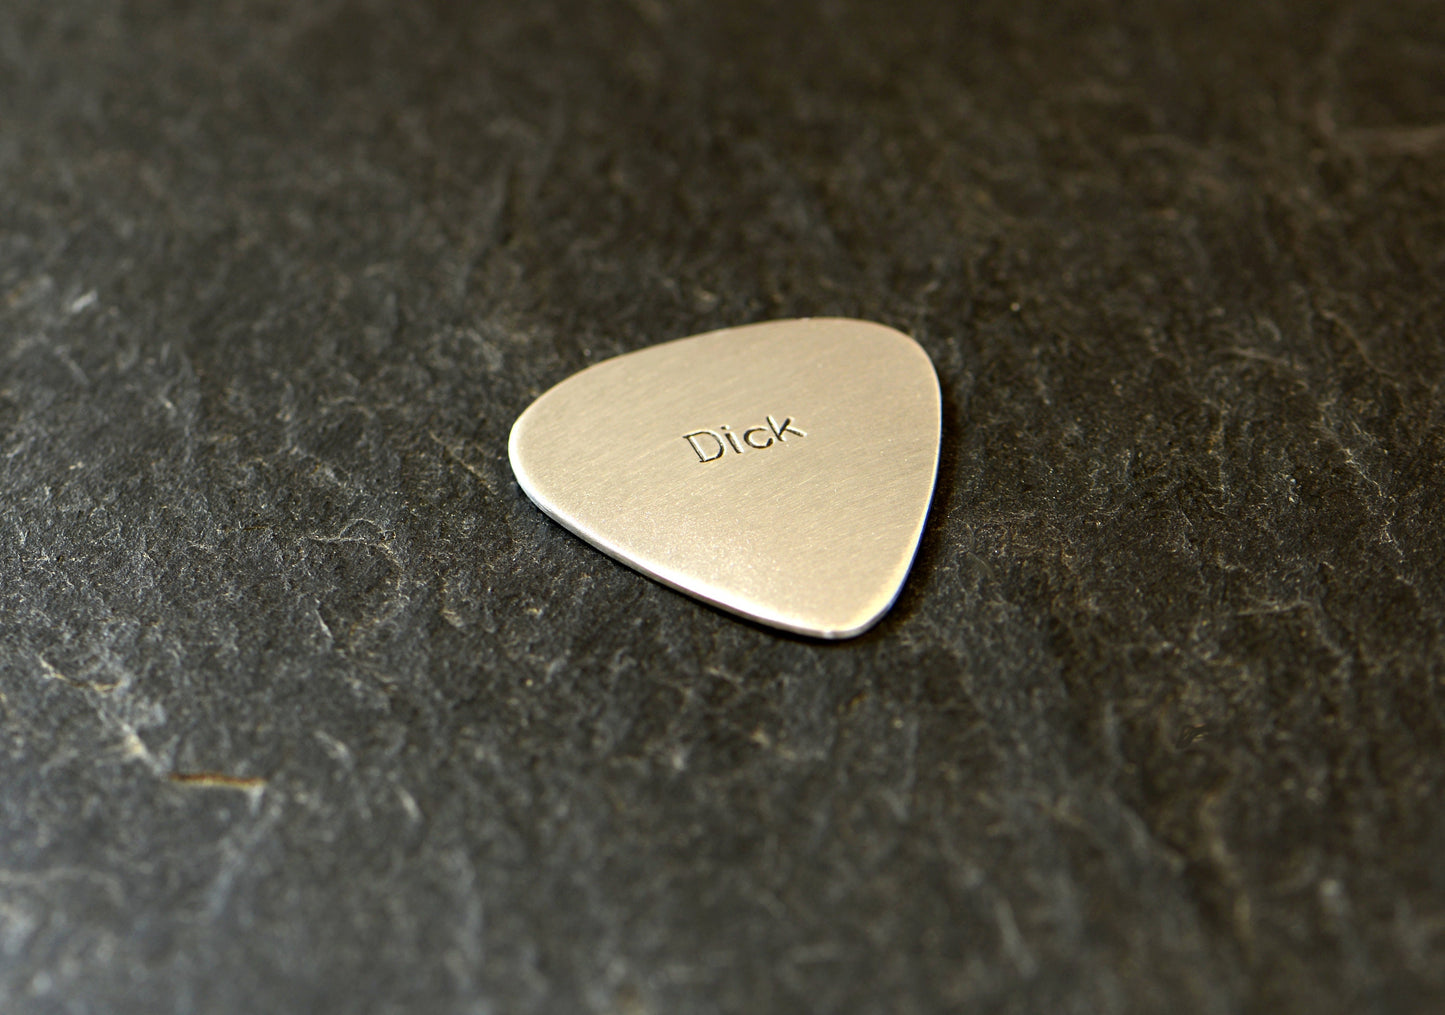 Extra Thick Dick Pick Aluminum Guitar Pick - 14 gauge and playable